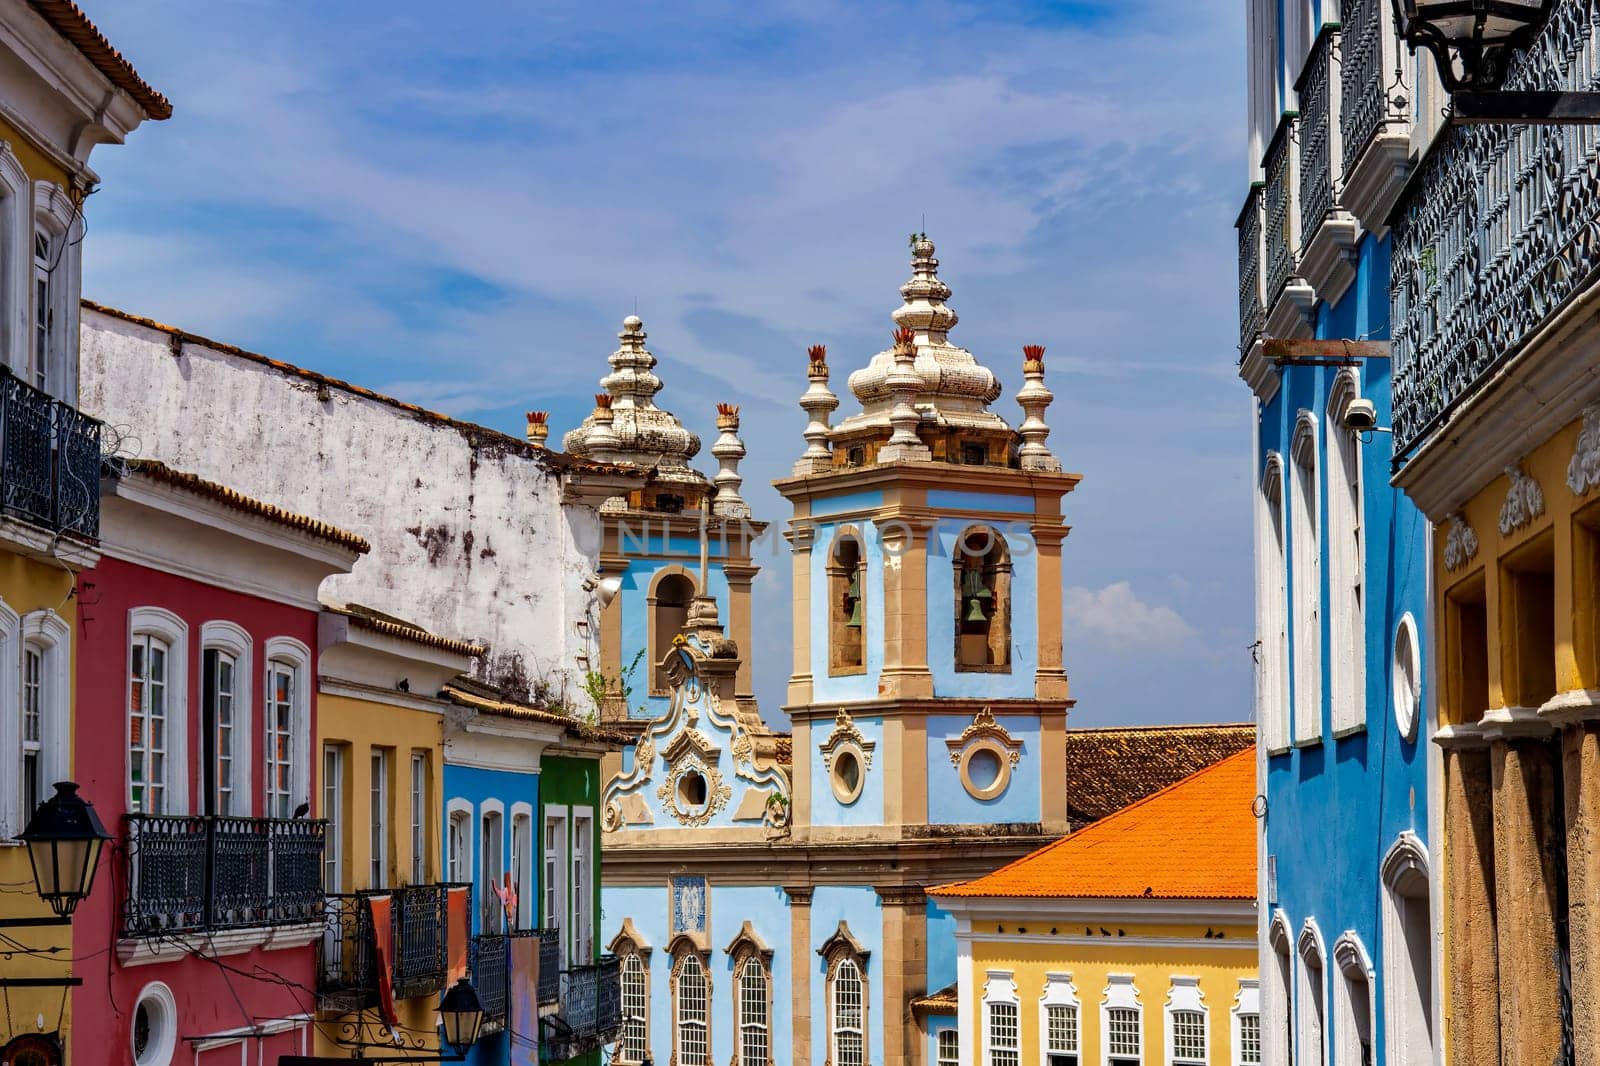 Historic colorful buildings and baroque churches in the famous Pelourinho neighborhood in Salvador, Bahia